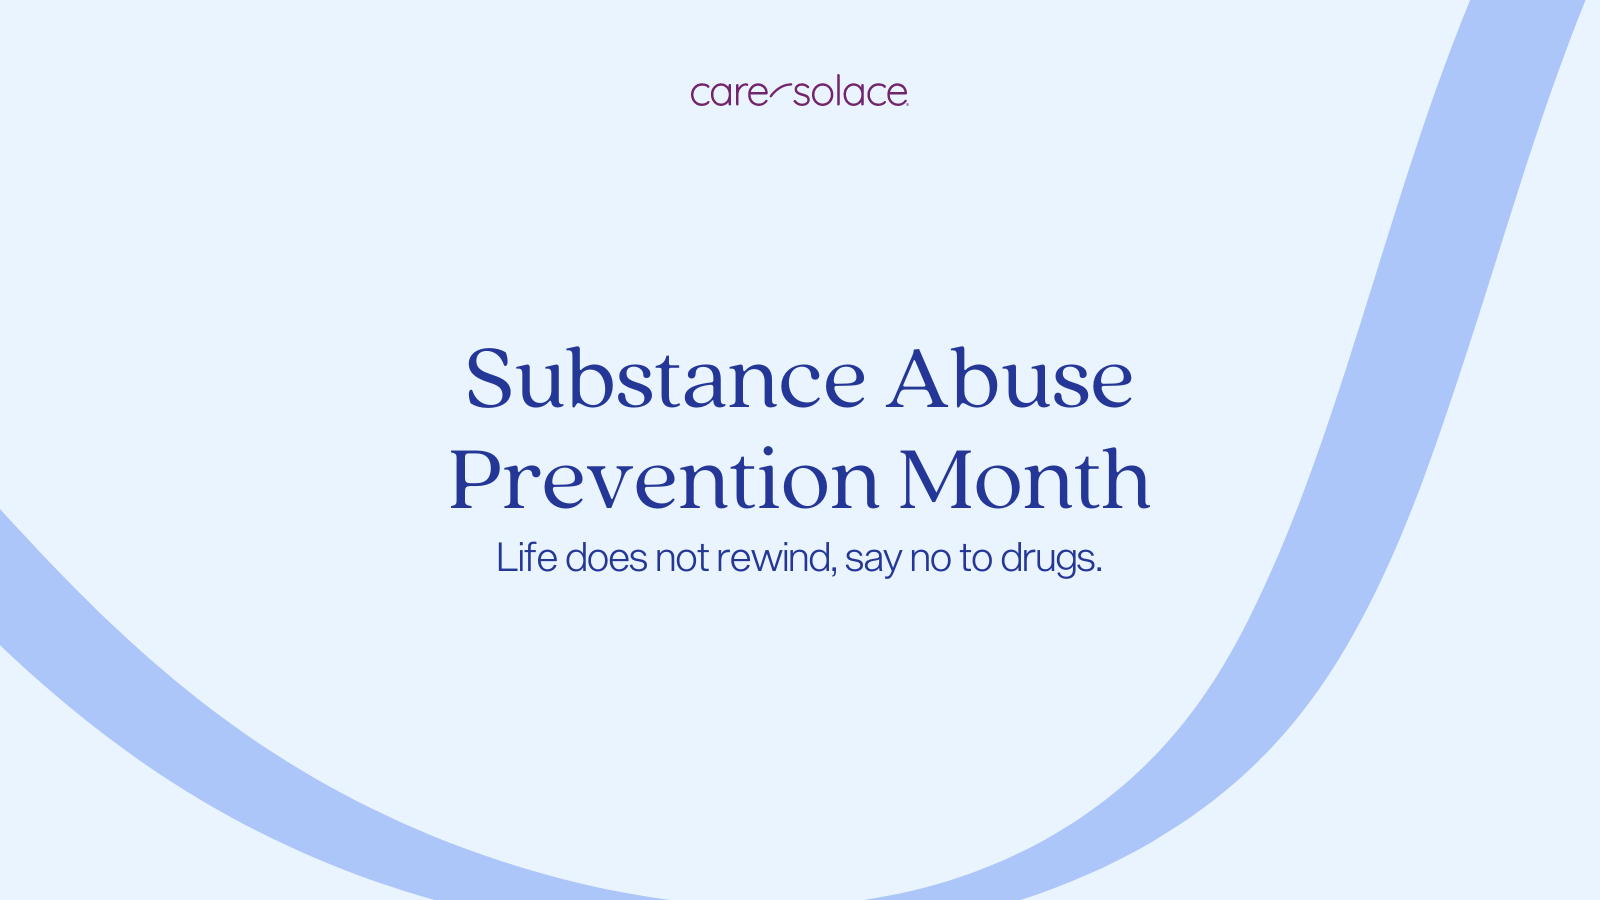 Substance Abuse Prevention Month - Life does not rewind, say no to drugs